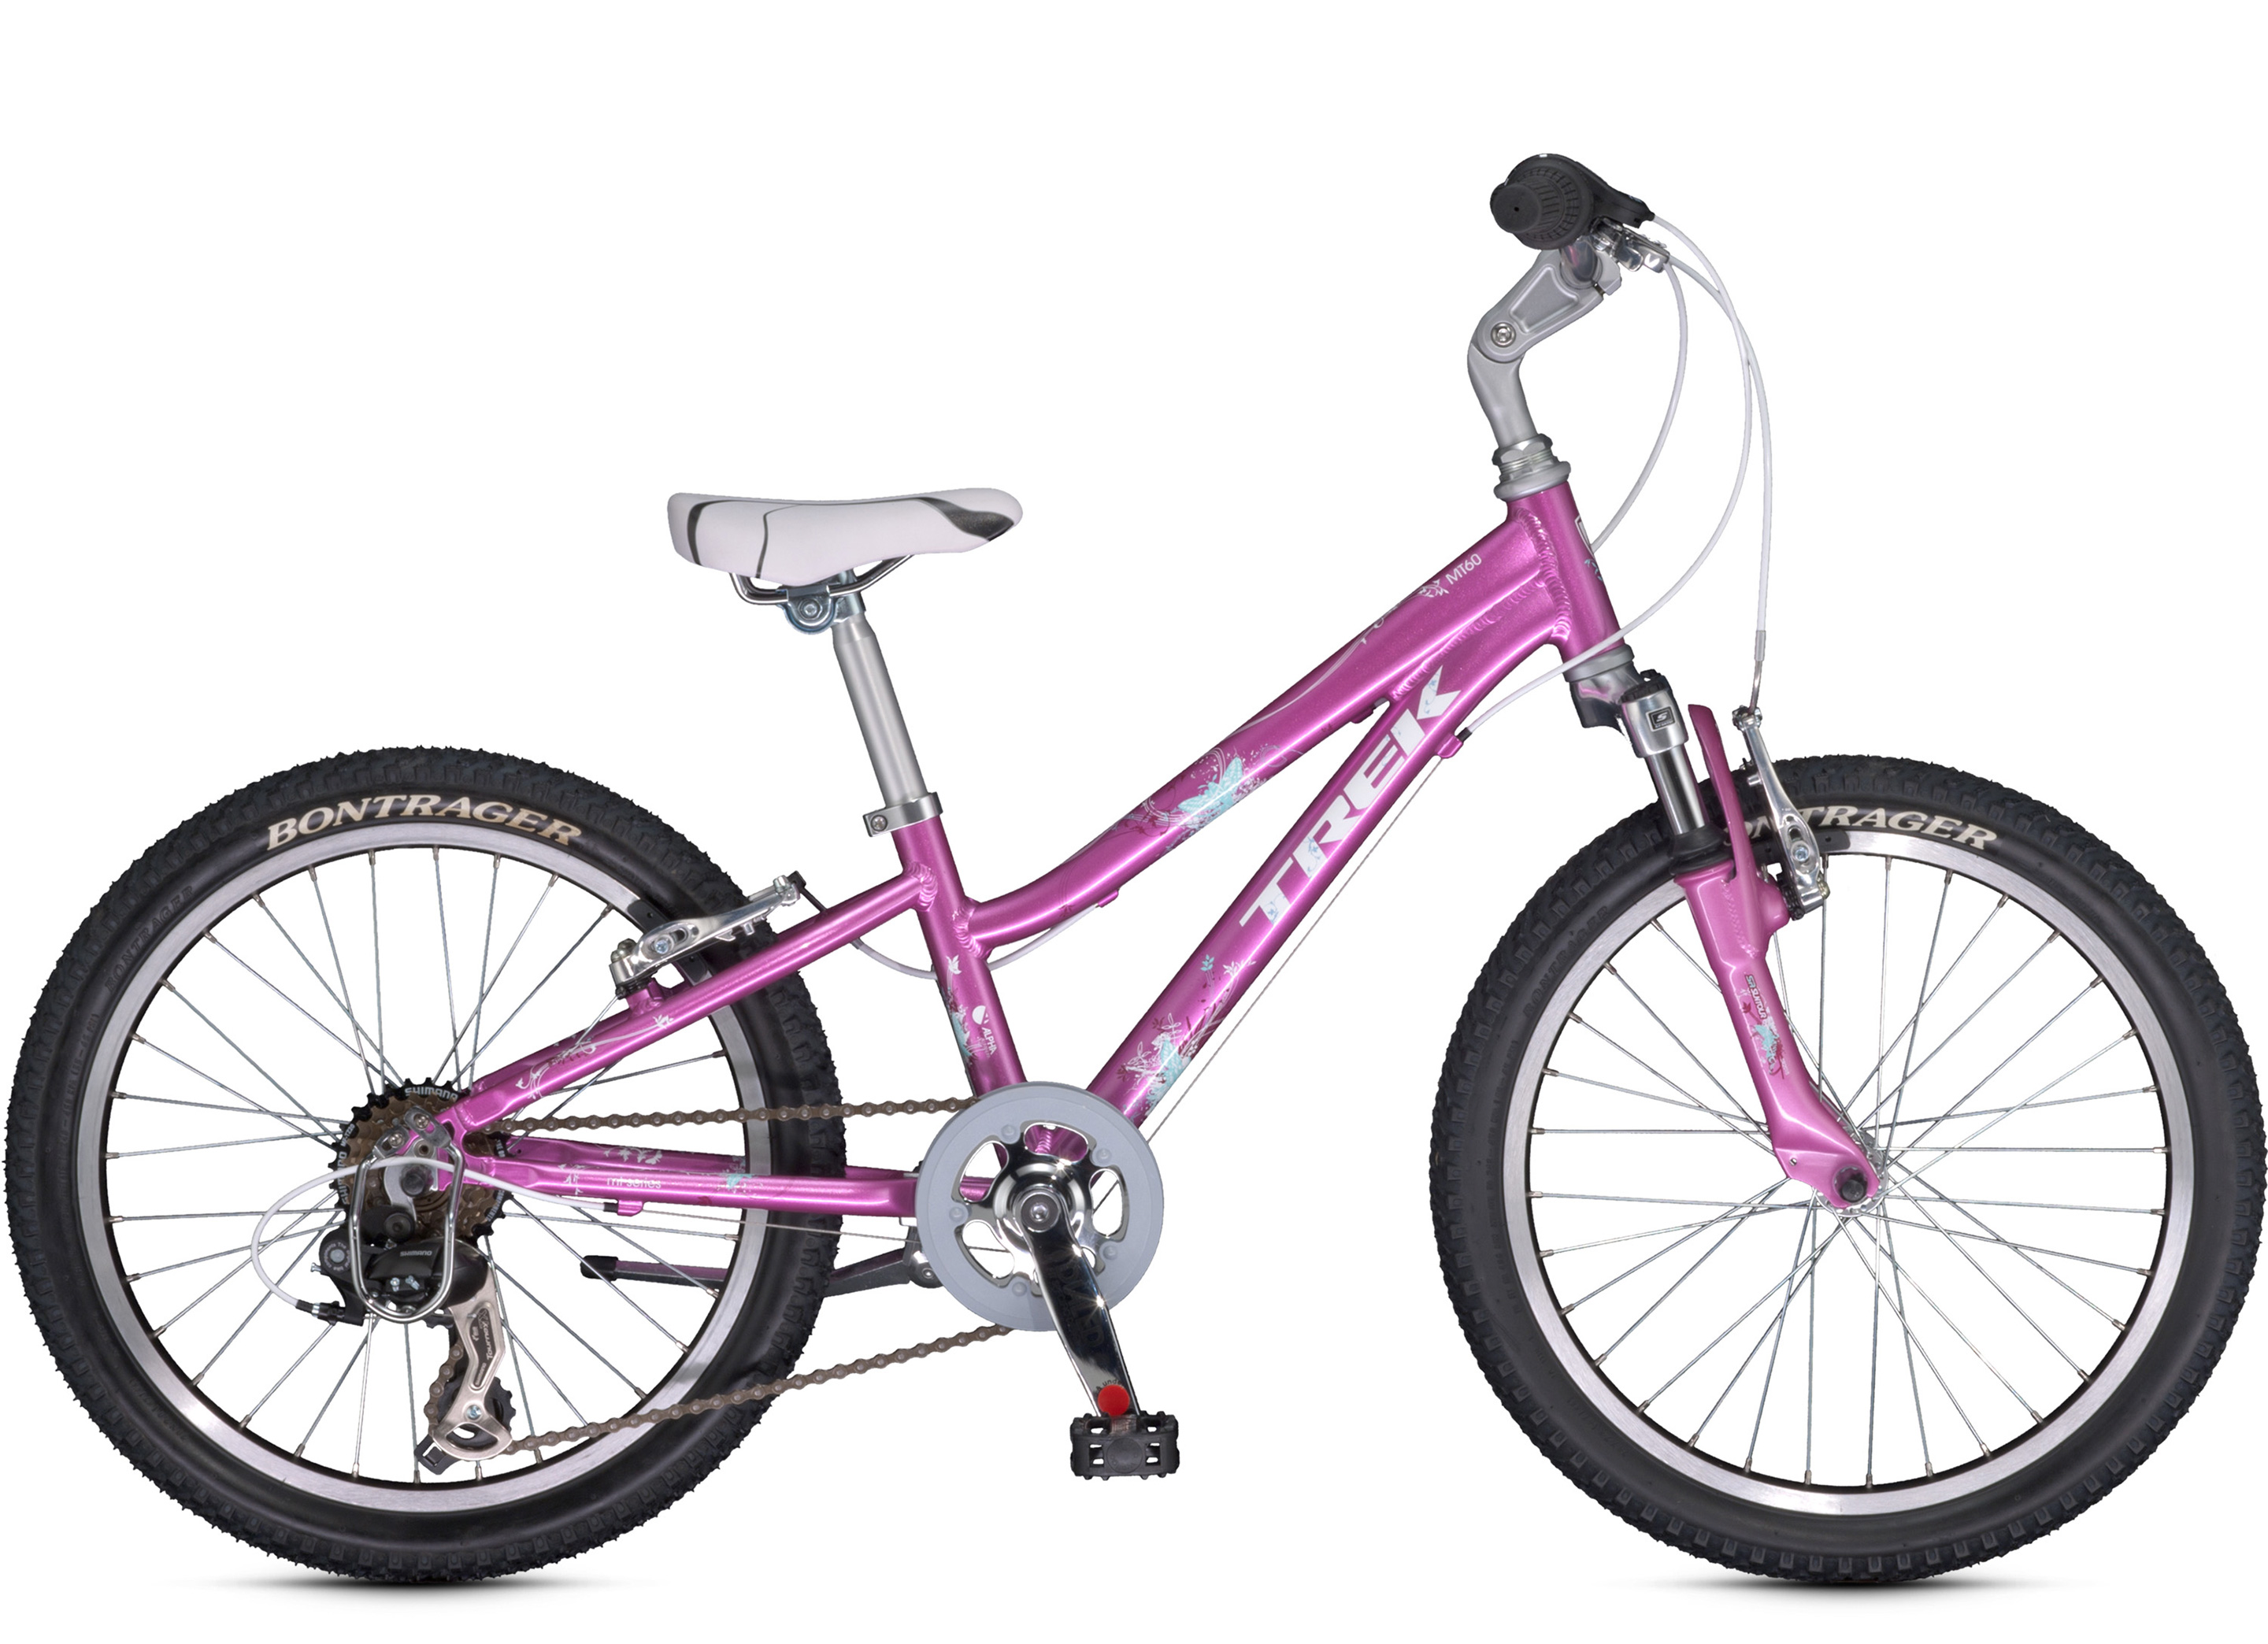 2013 MT 60 fille | Bouticycle